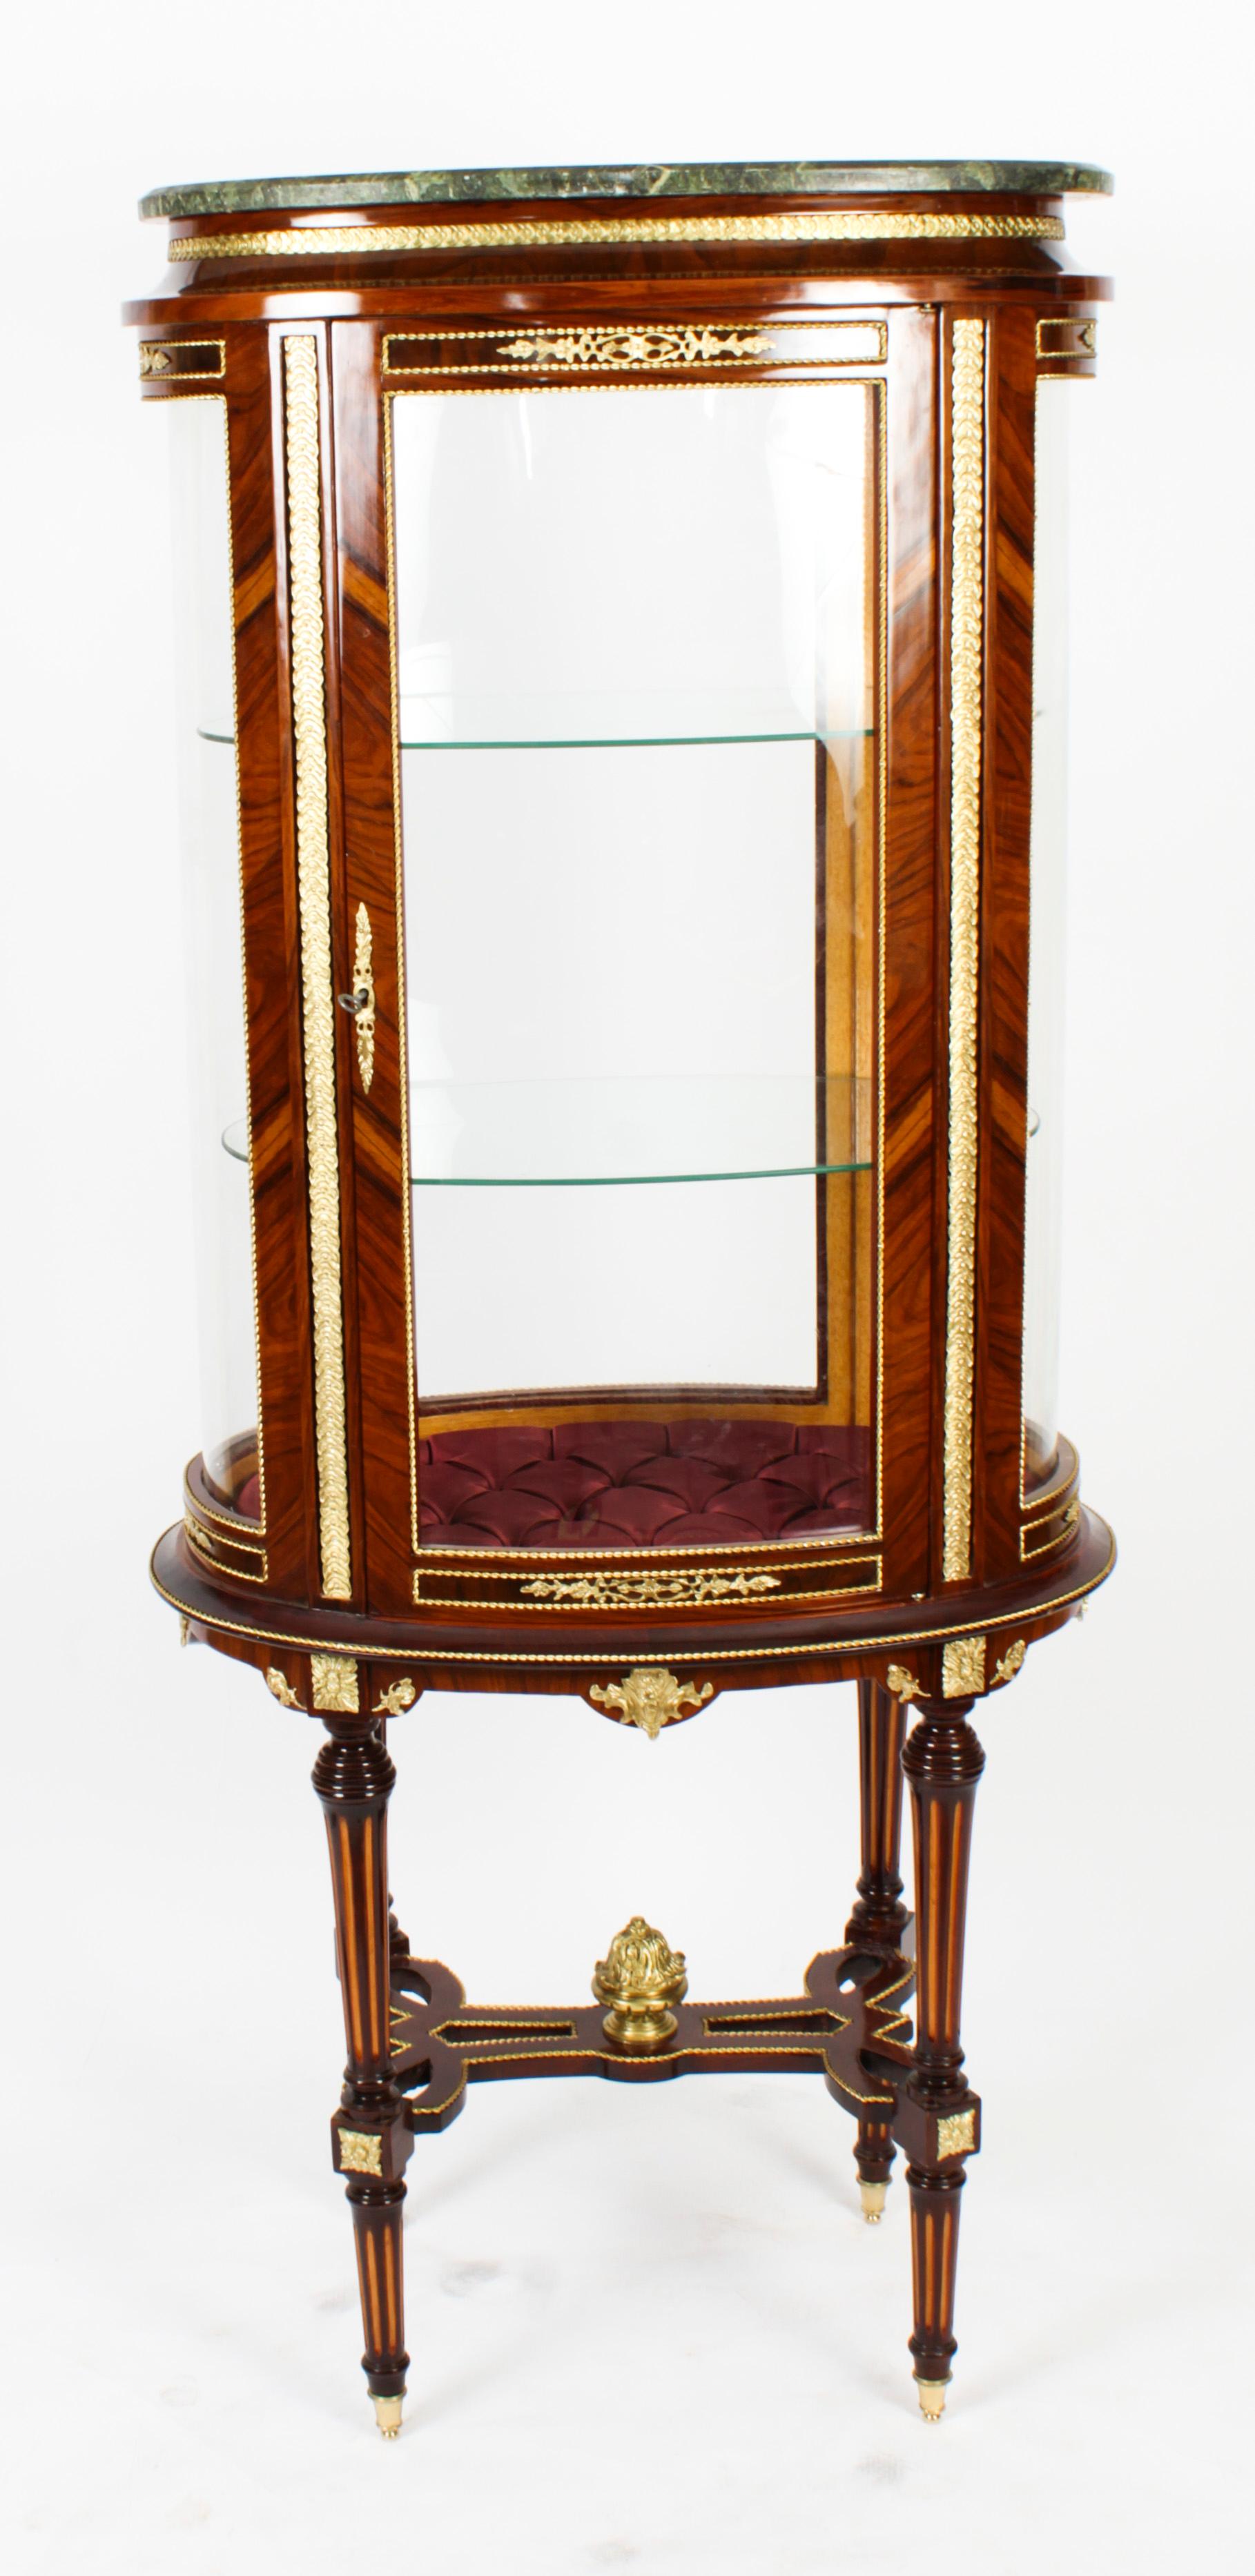 This is an exquisite walnut and ormolu mounted oval display cabinet surmounted with a Verde Antico marble top. This elegant display cabinet will soon become the centrepiece of your furniture collection and can suitably house your most valued